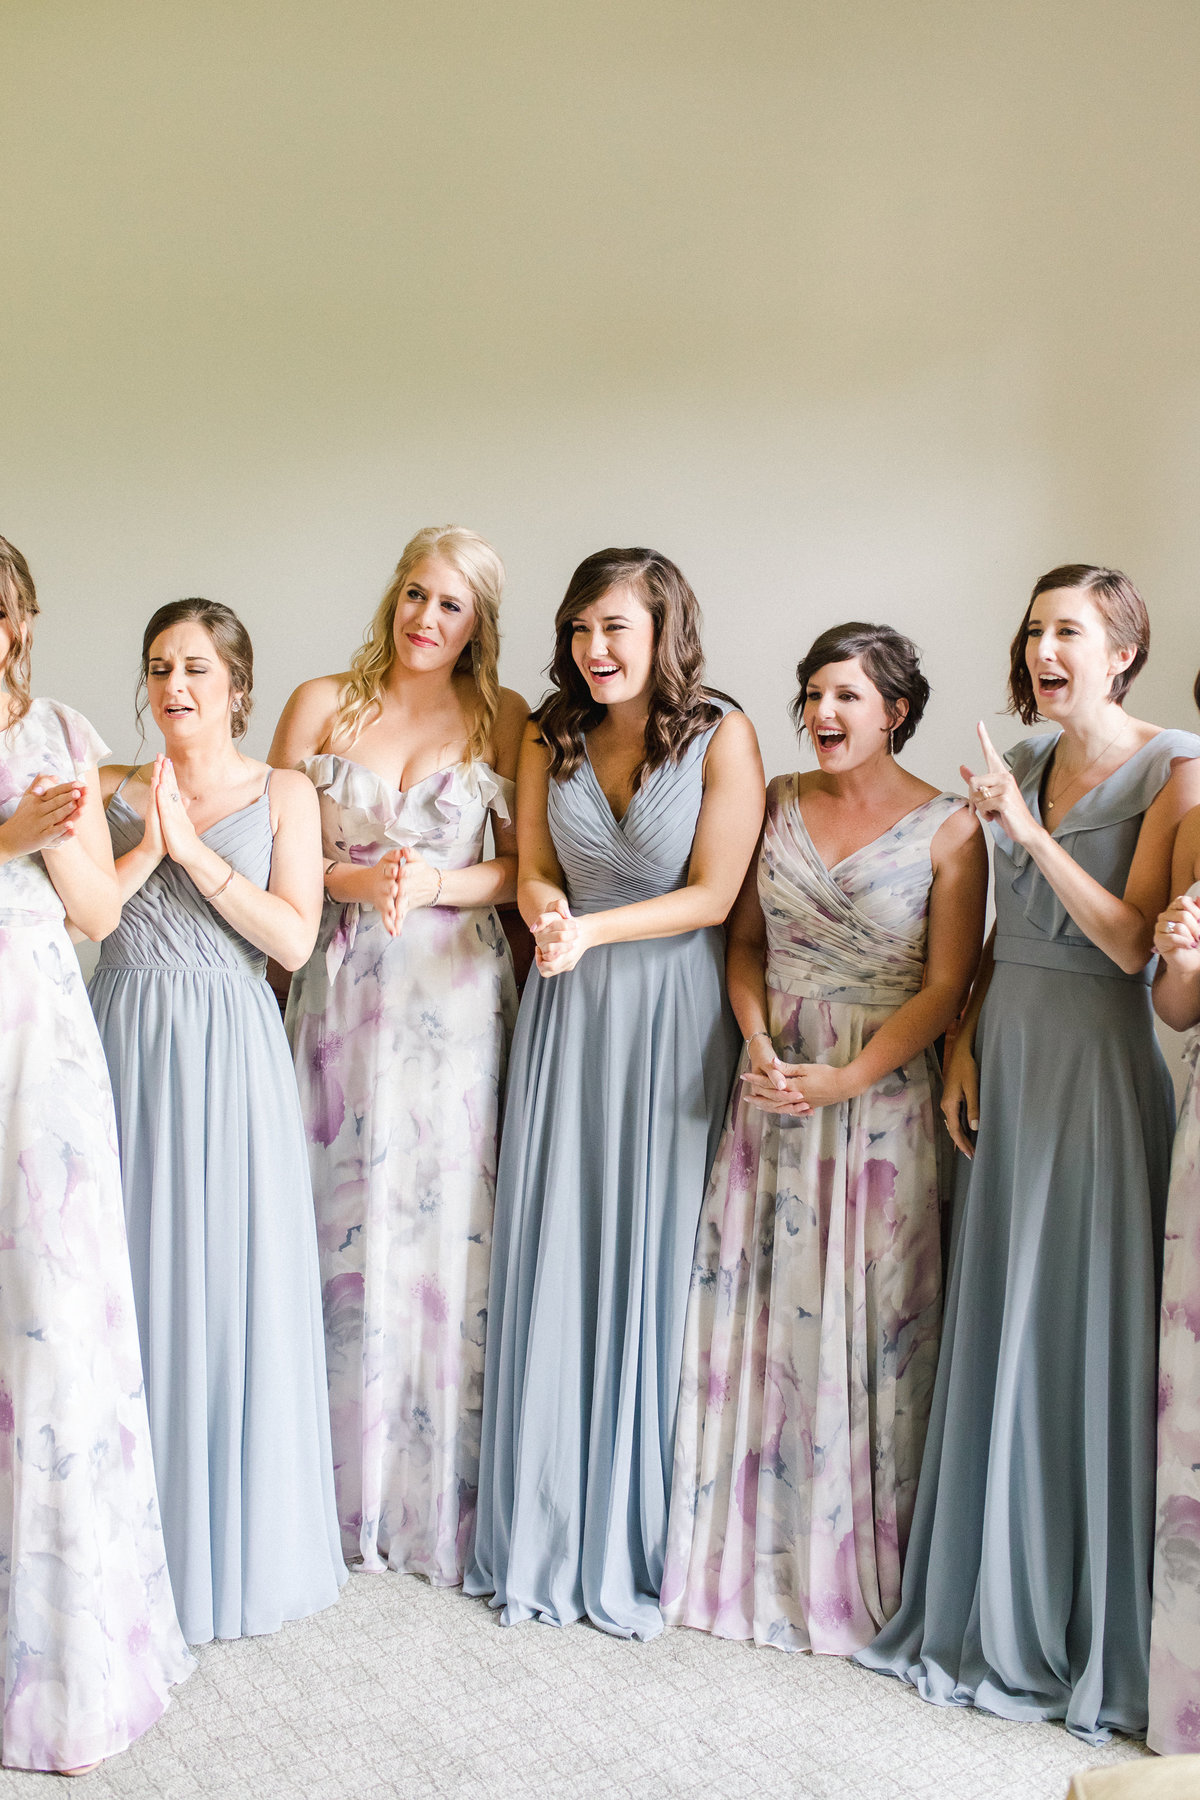 Bridesmaids emotional reaction as they see the bride in her dress for the first time on the wedding day